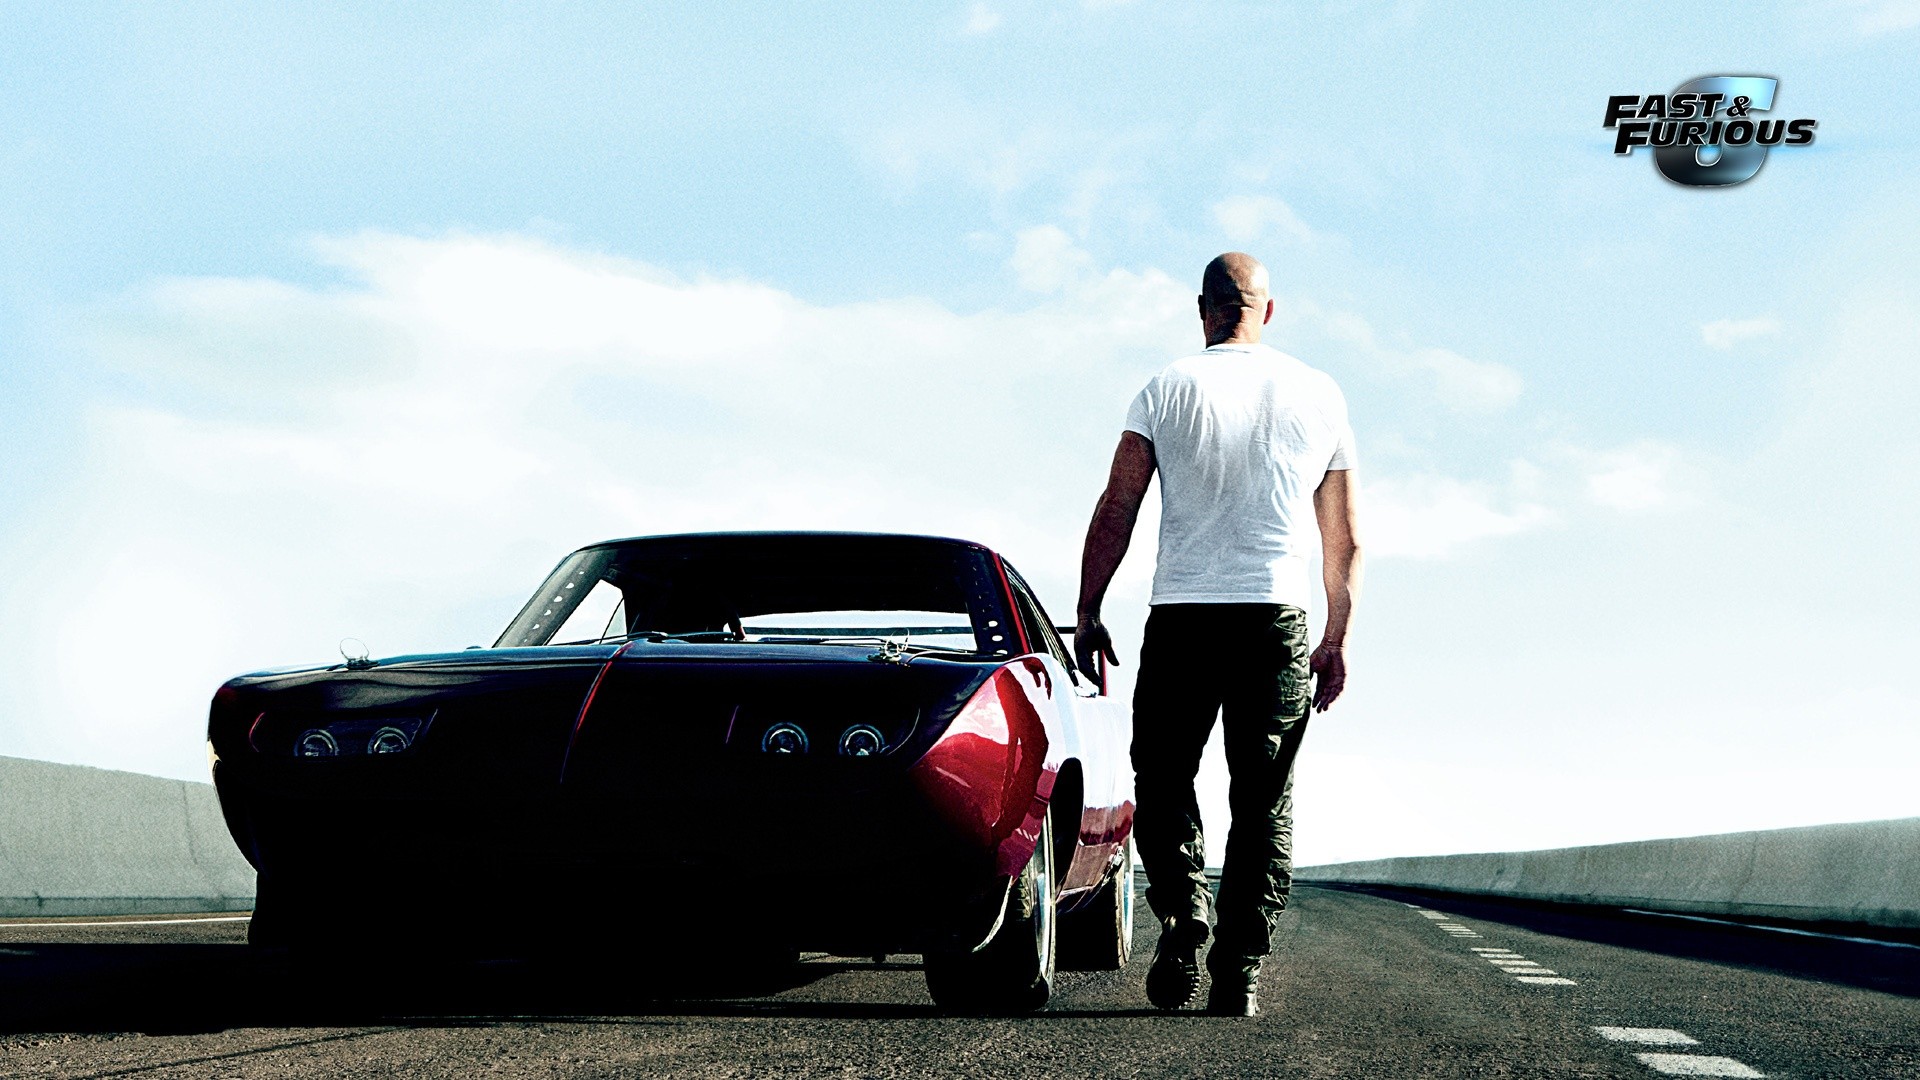 vin diesel classic car classic fast furious hot rods muscle wallpapers hd desktop and mobile backgrounds vin diesel classic car classic